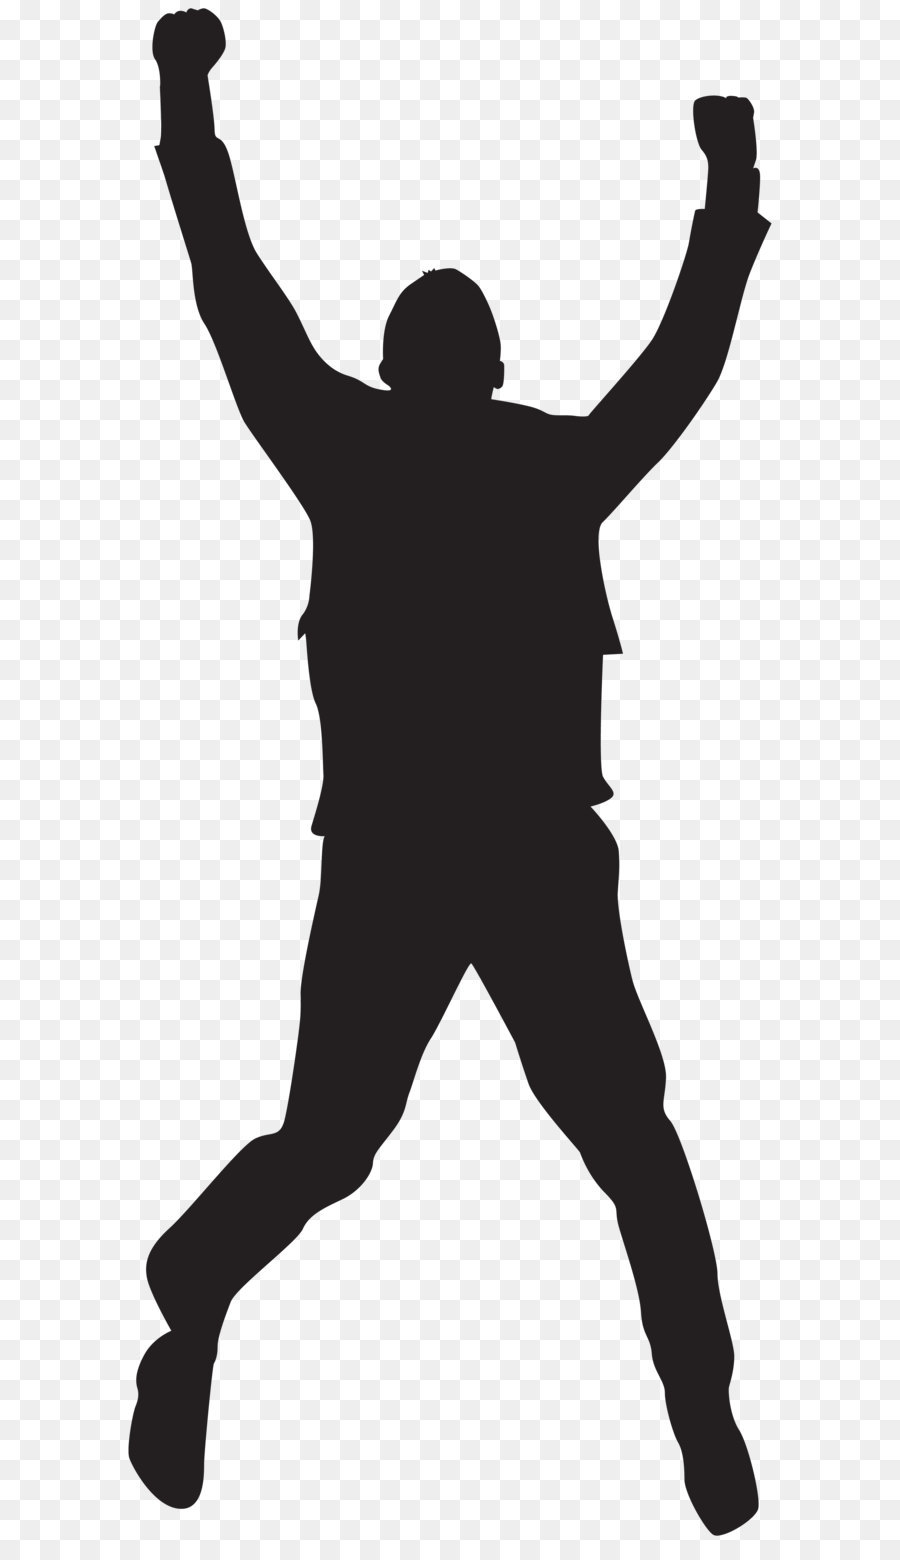 Jumping Silhouette Clip art - Jumping Happy Man Silhouette PNG Clip Art Image png download - 3368*8000 - Free Transparent Silhouette png Download.